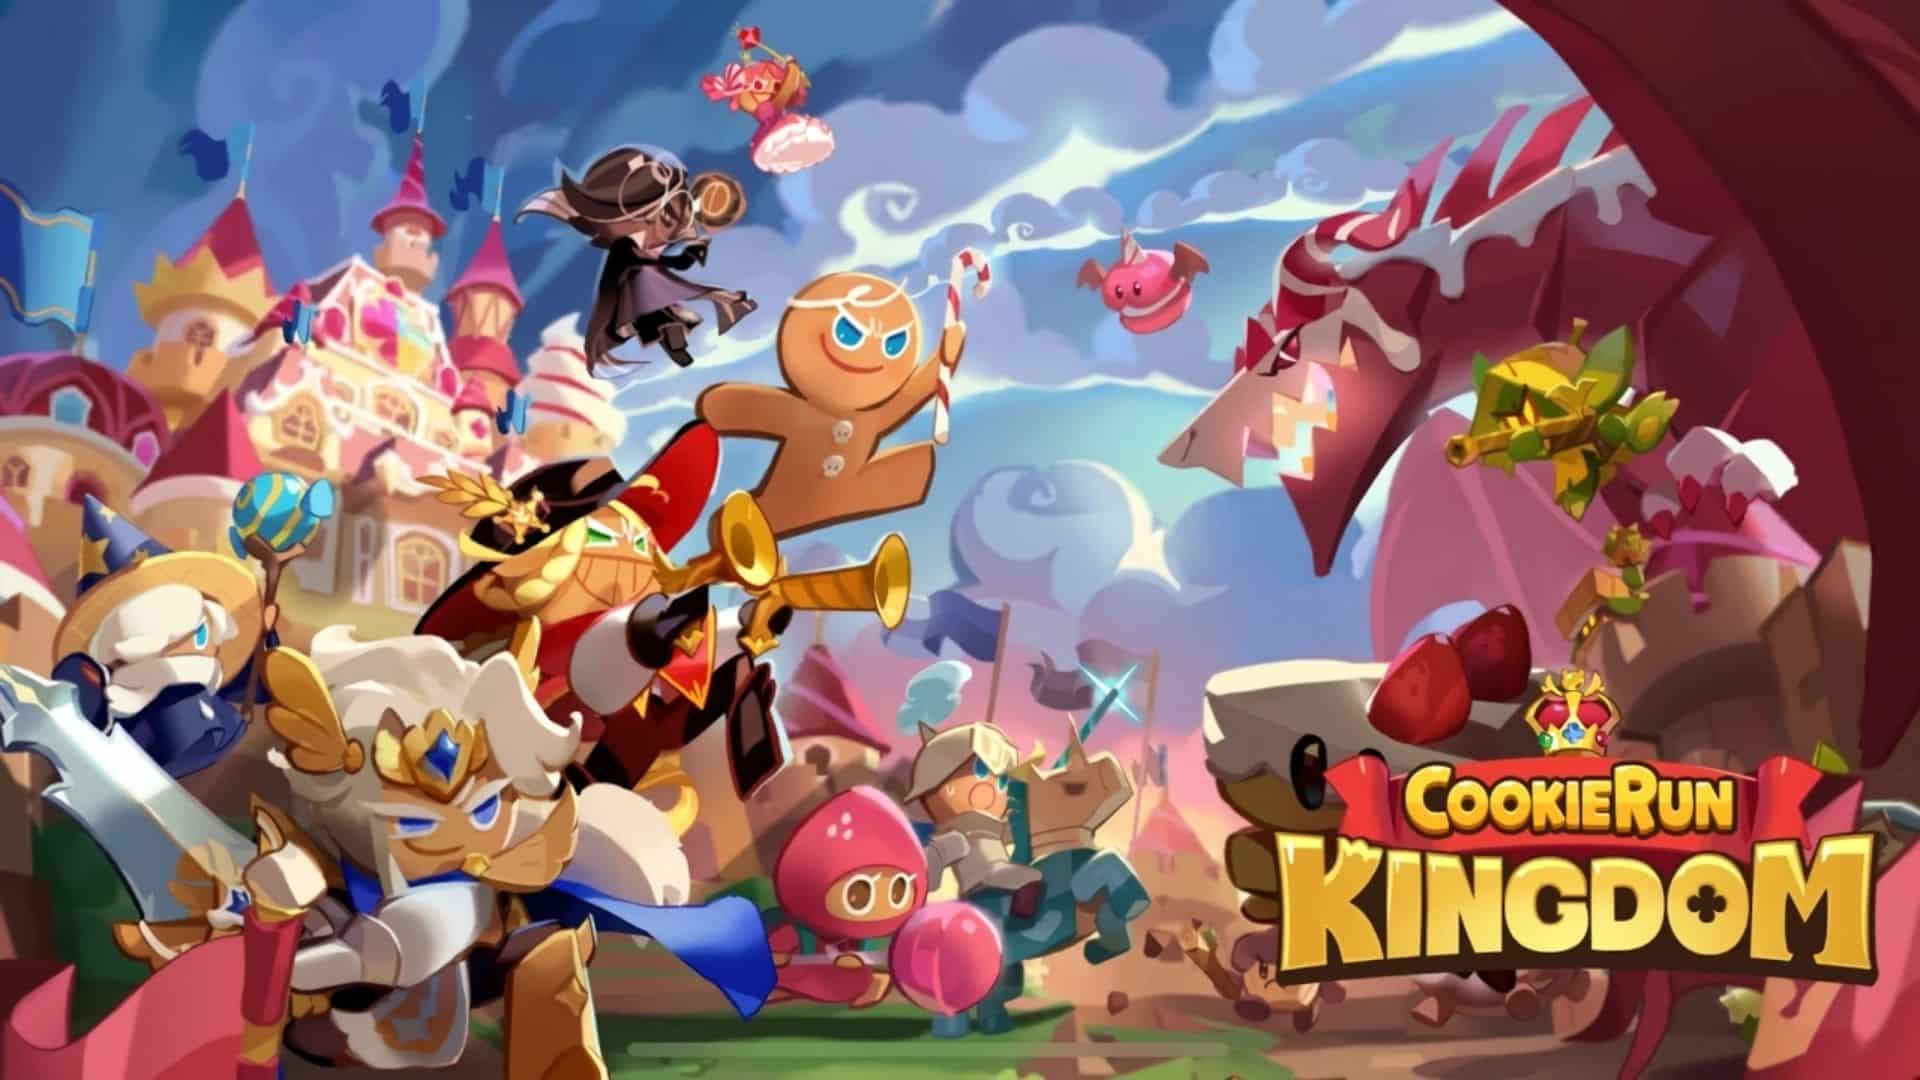 cookie run kingdom art featuring some of the game's characters